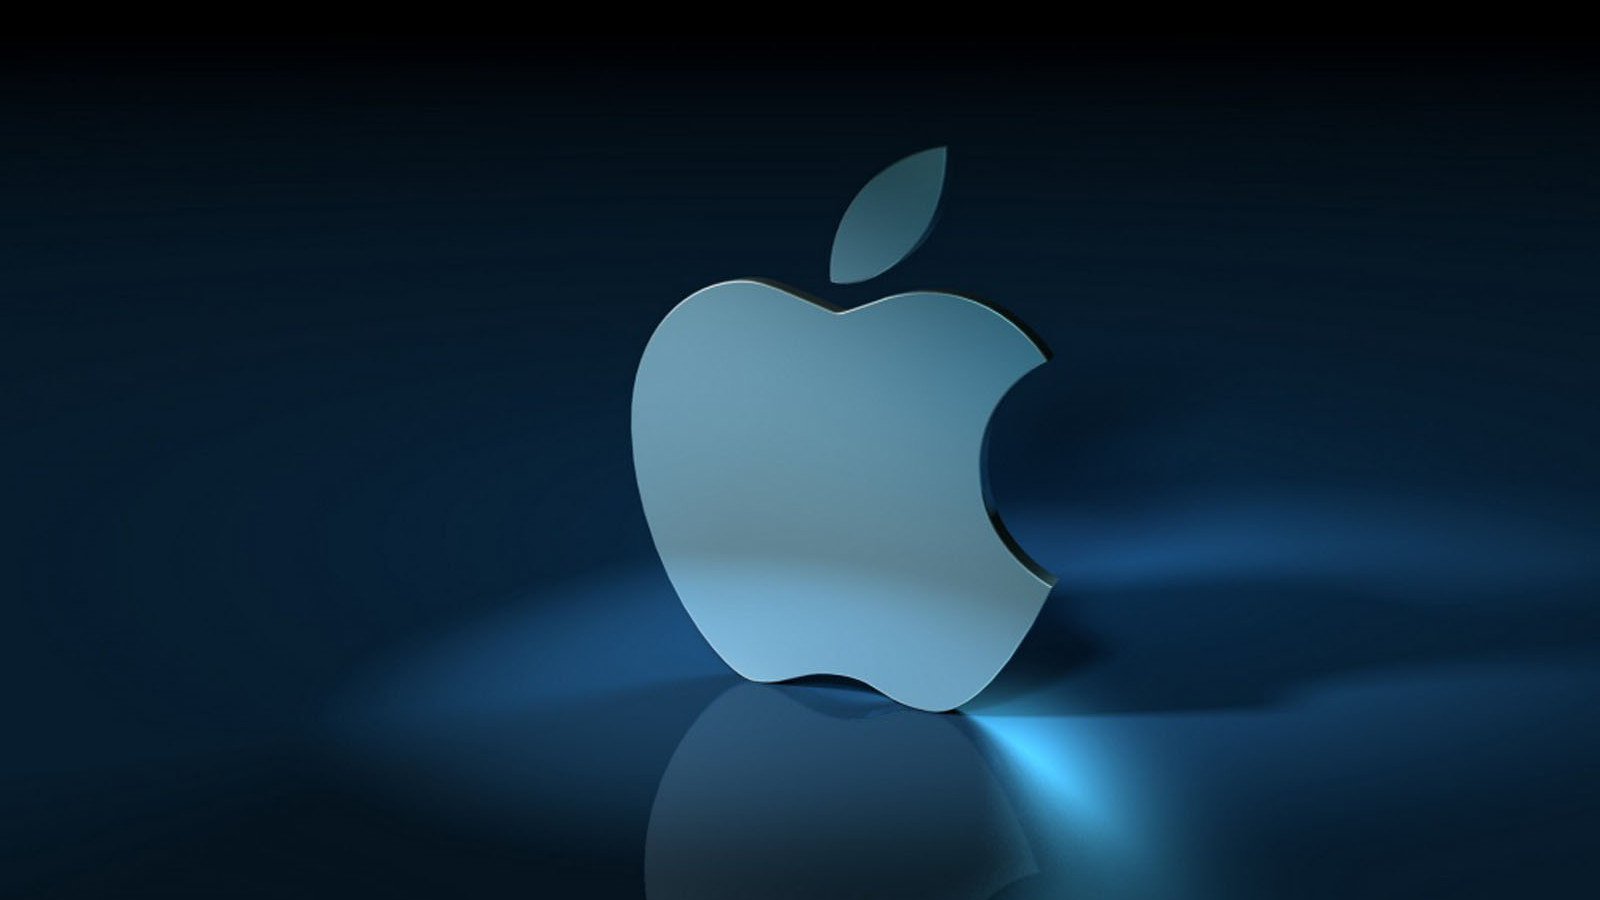 Apple will hold a presentation on March 27